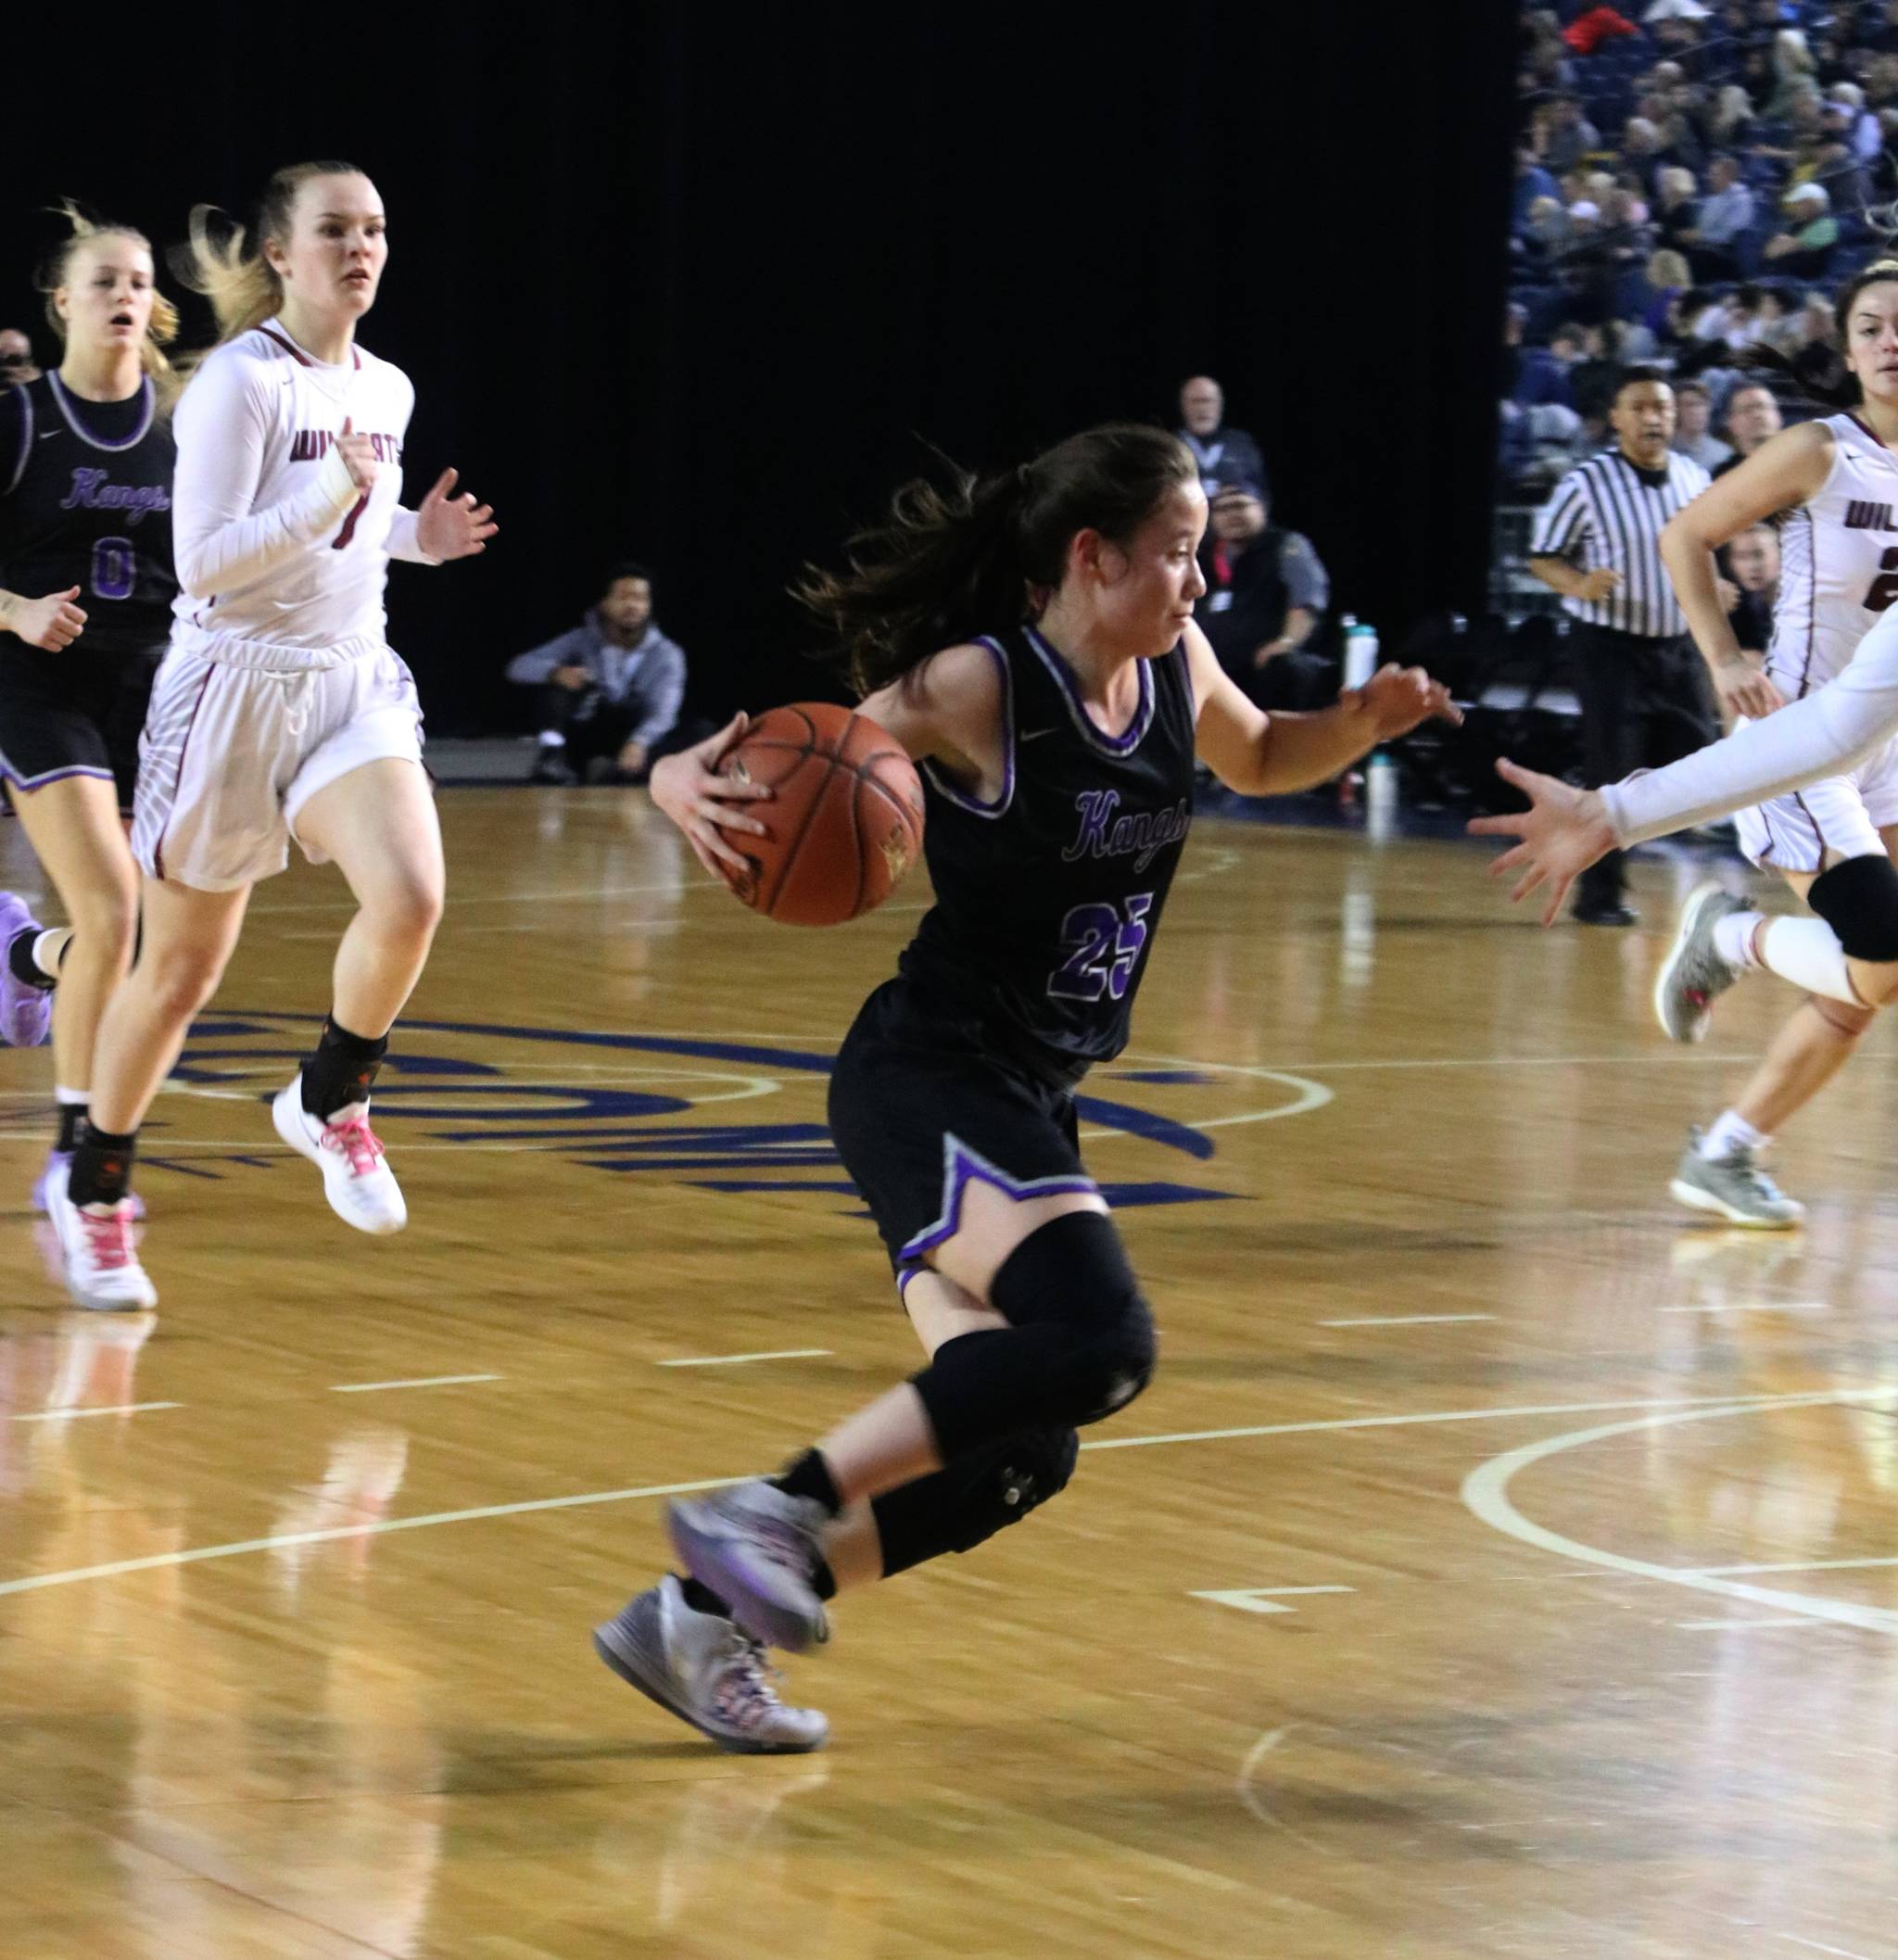 Kang Rosa Smith drives to the hoop against Mt. Spokane. Andy Nystrom/ staff photo